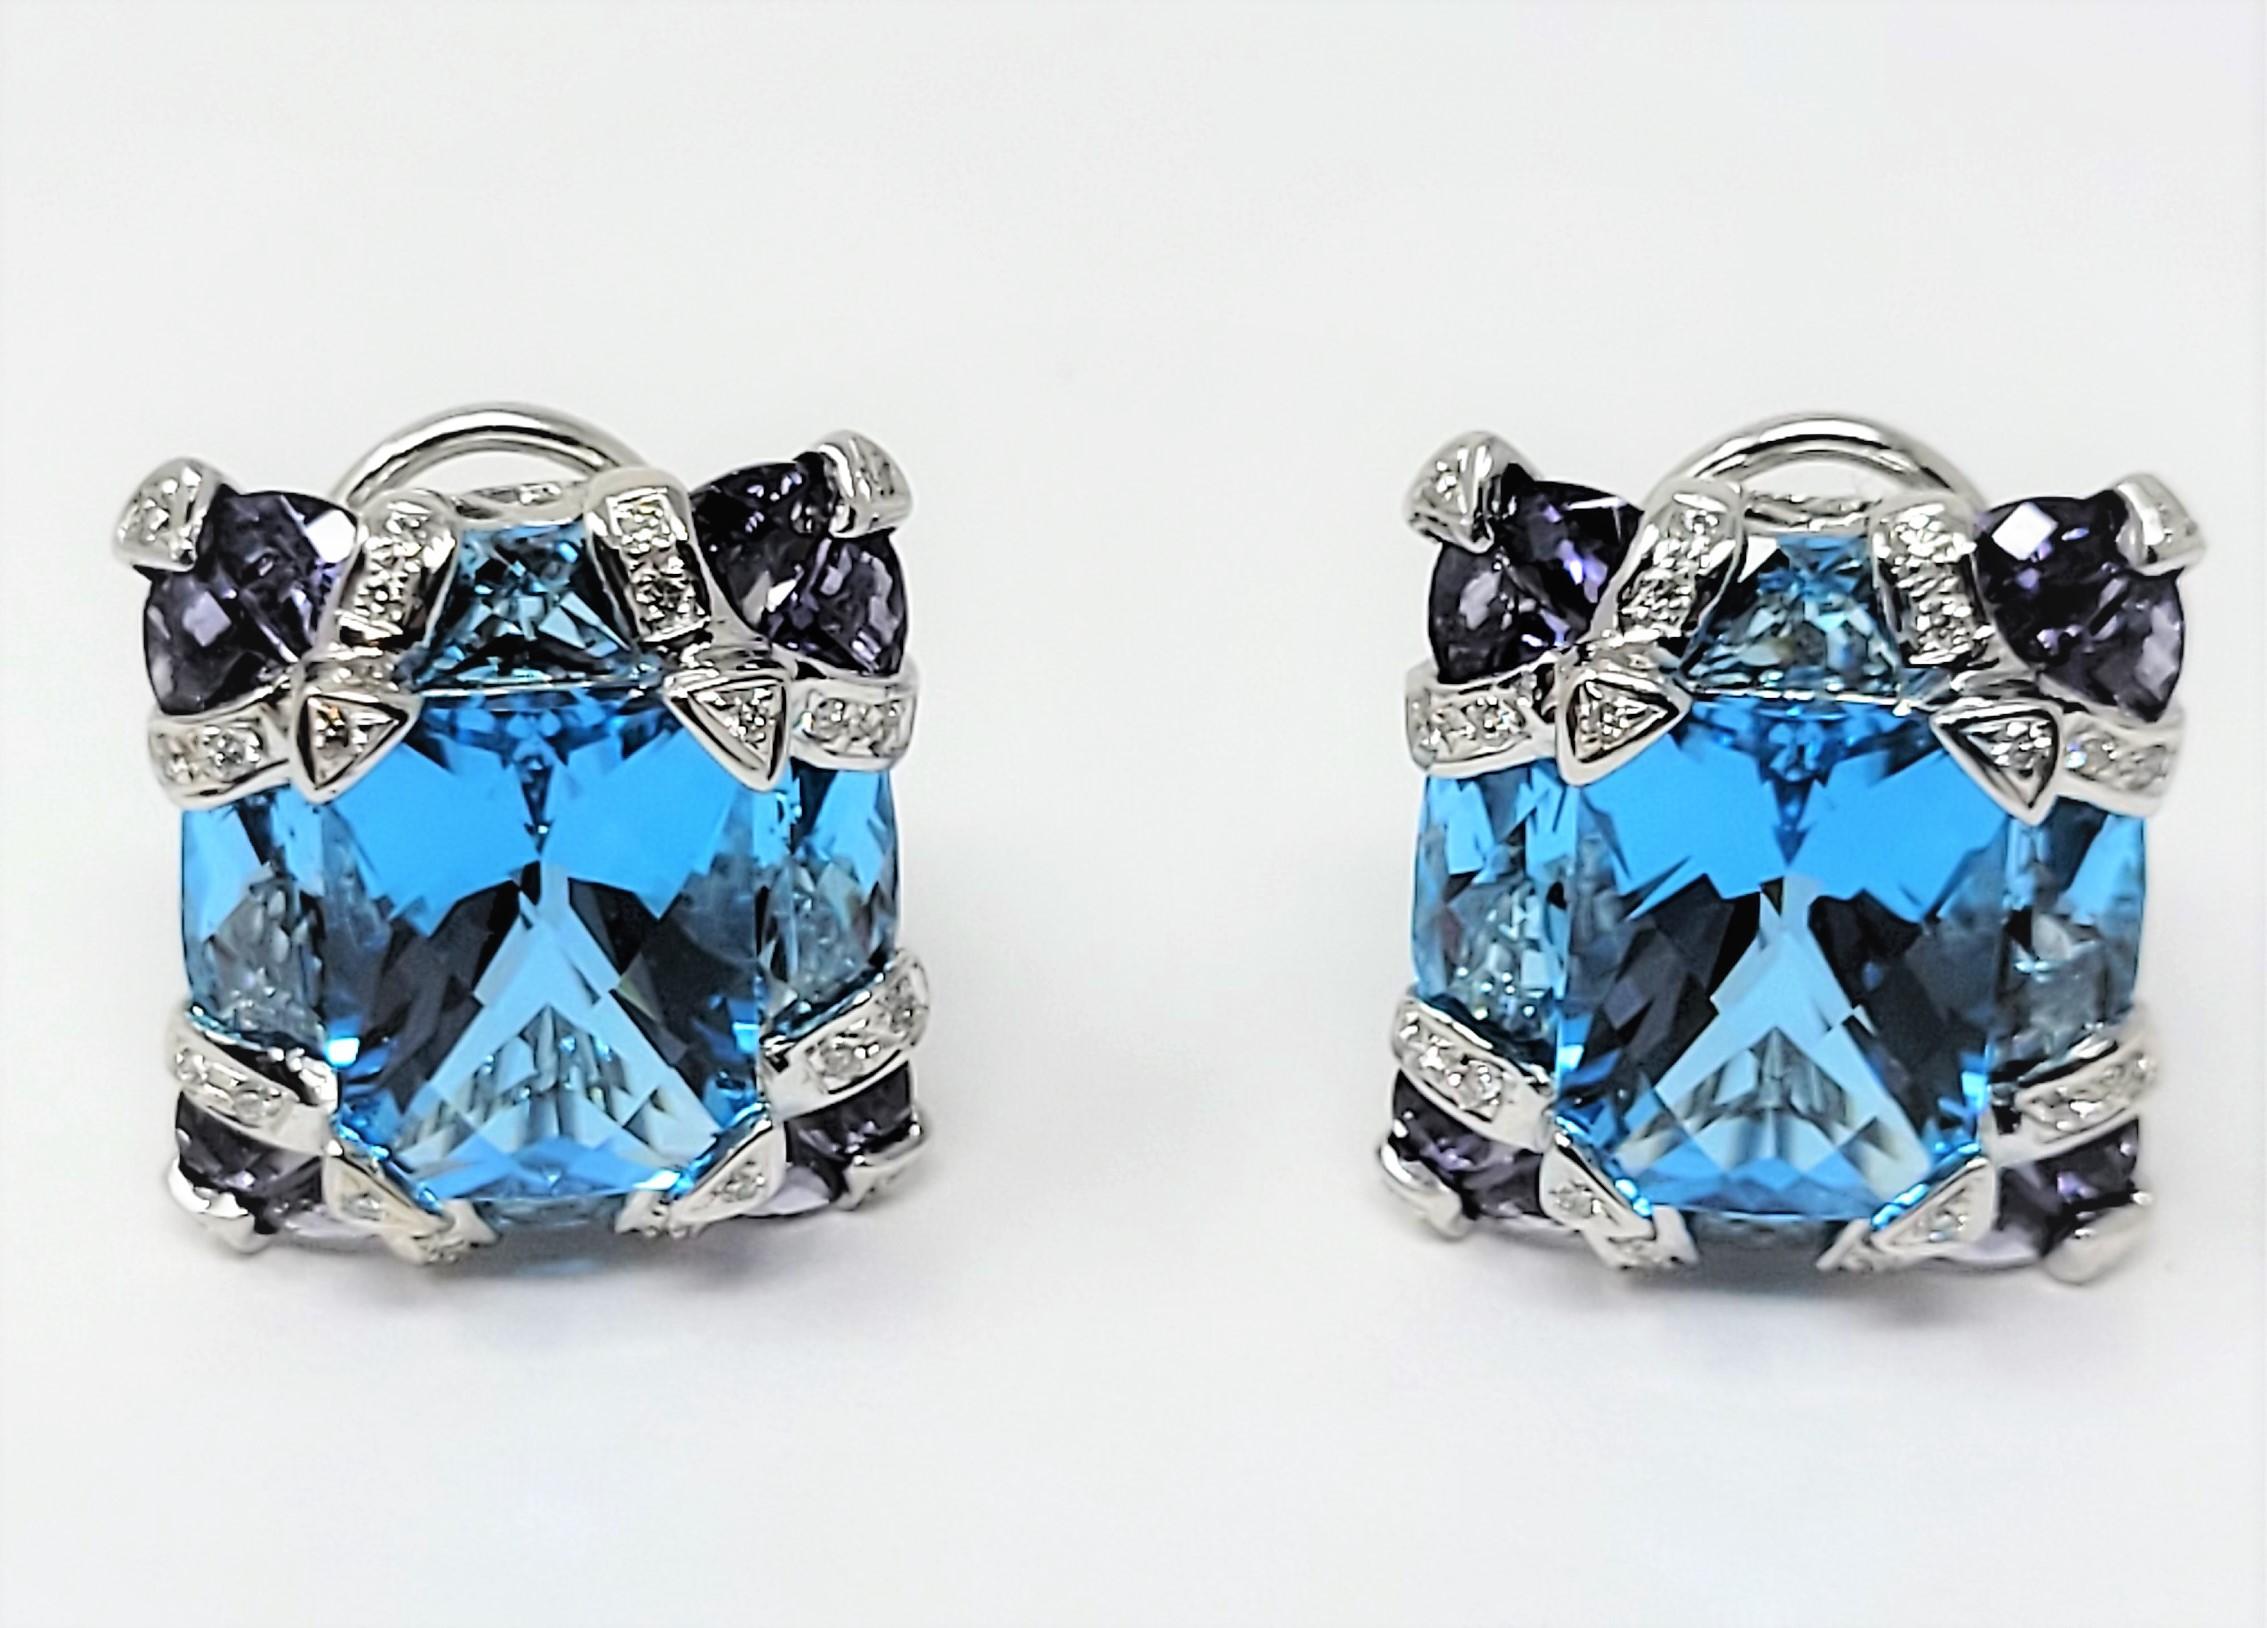 Bellarri blue topaz earrings dazzle with iolite and diamond accents in 18 karat white gold.  Versatile backs make them easy to wear as clip ons, or with pierced ears!